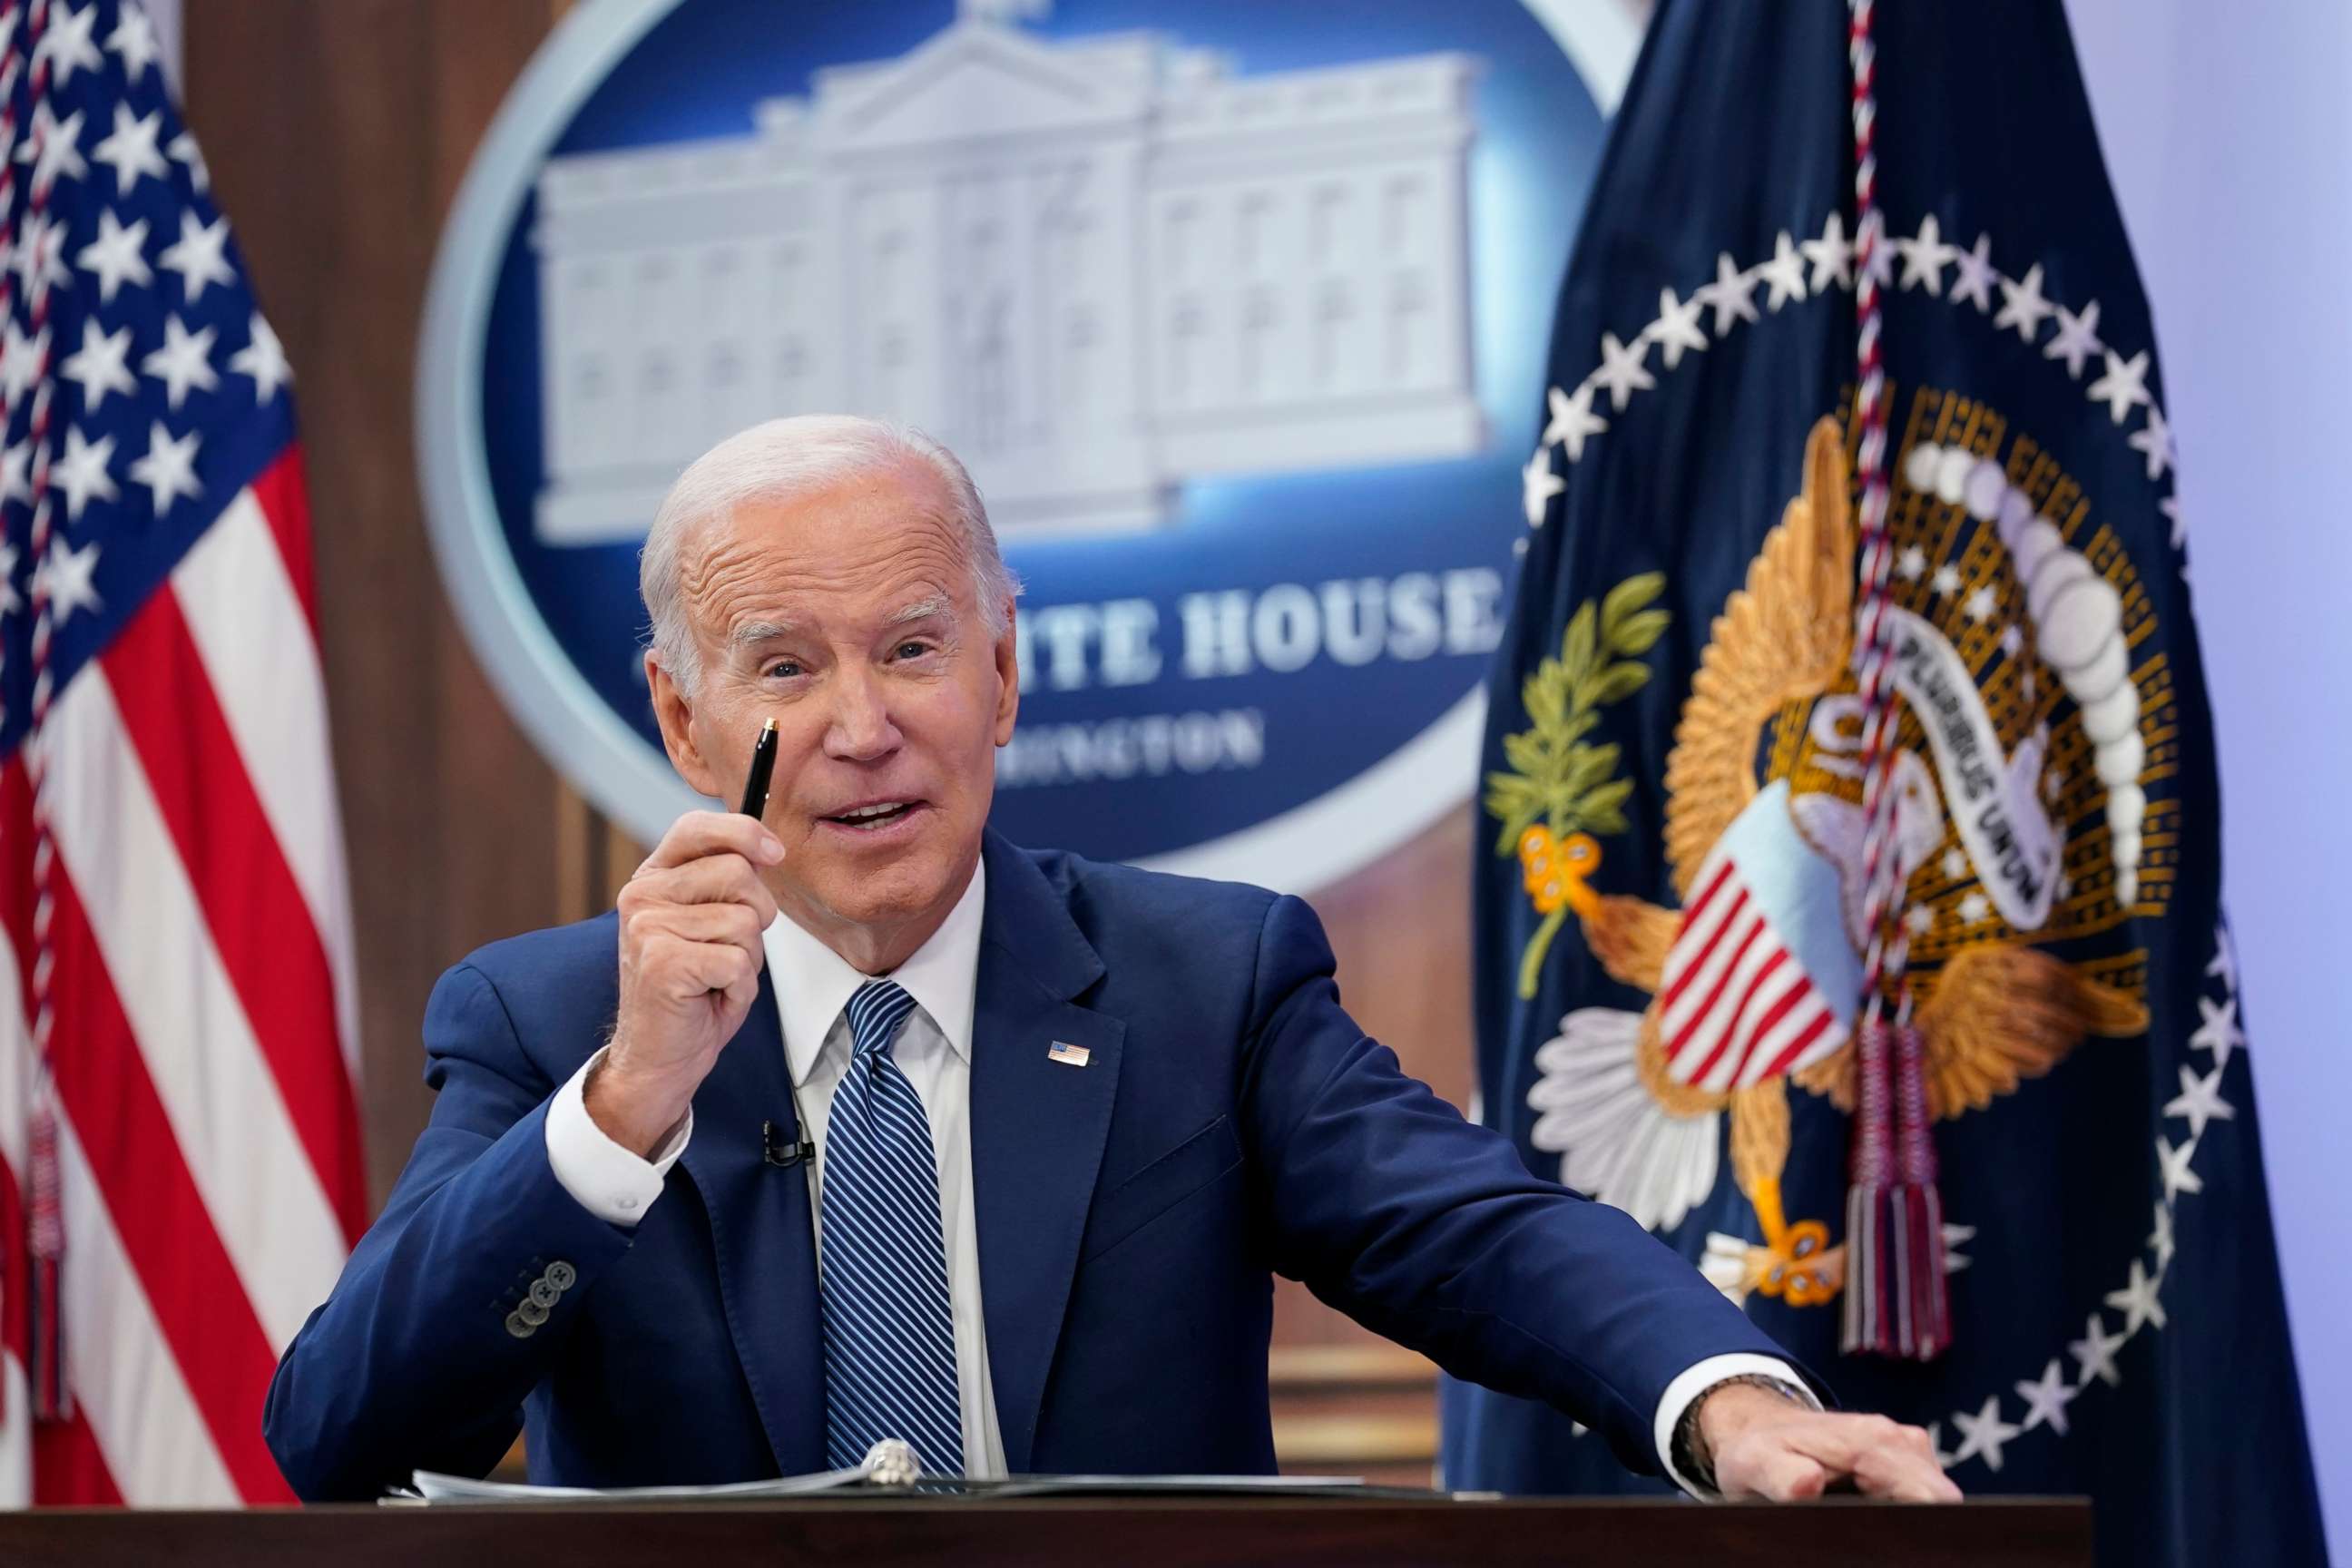 PHOTO: President Joe Biden speaks at the Summit on Fire Prevention and Control in the South Court Auditorium on the White House complex in Washington, on Oct. 11, 2022.